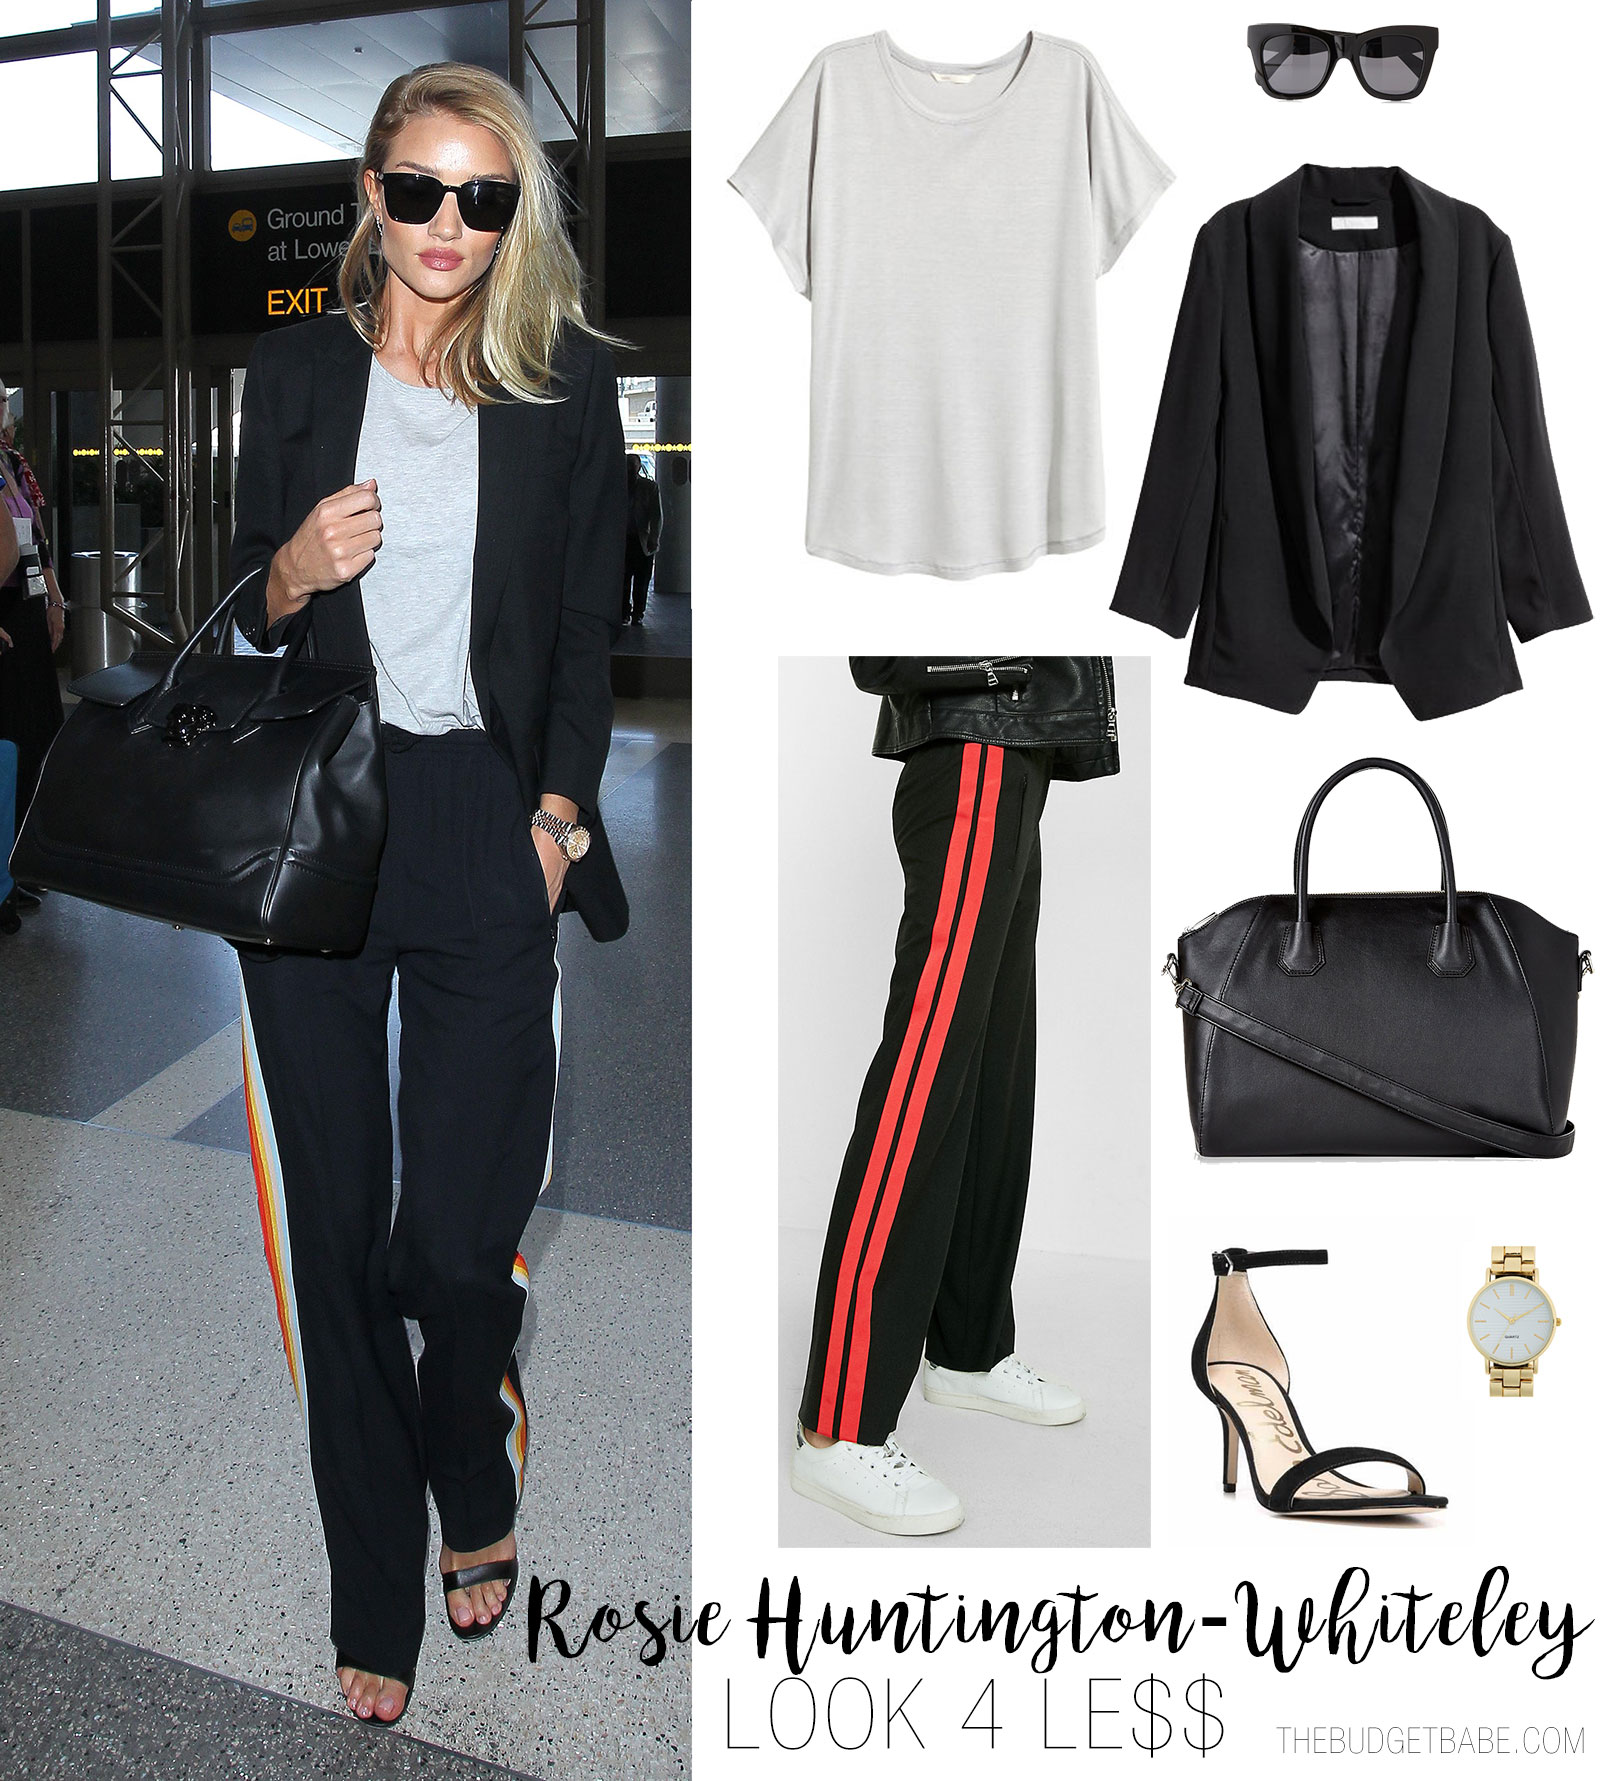 Rosie Huntington Whiteley wears track pants with heels and a blazer.